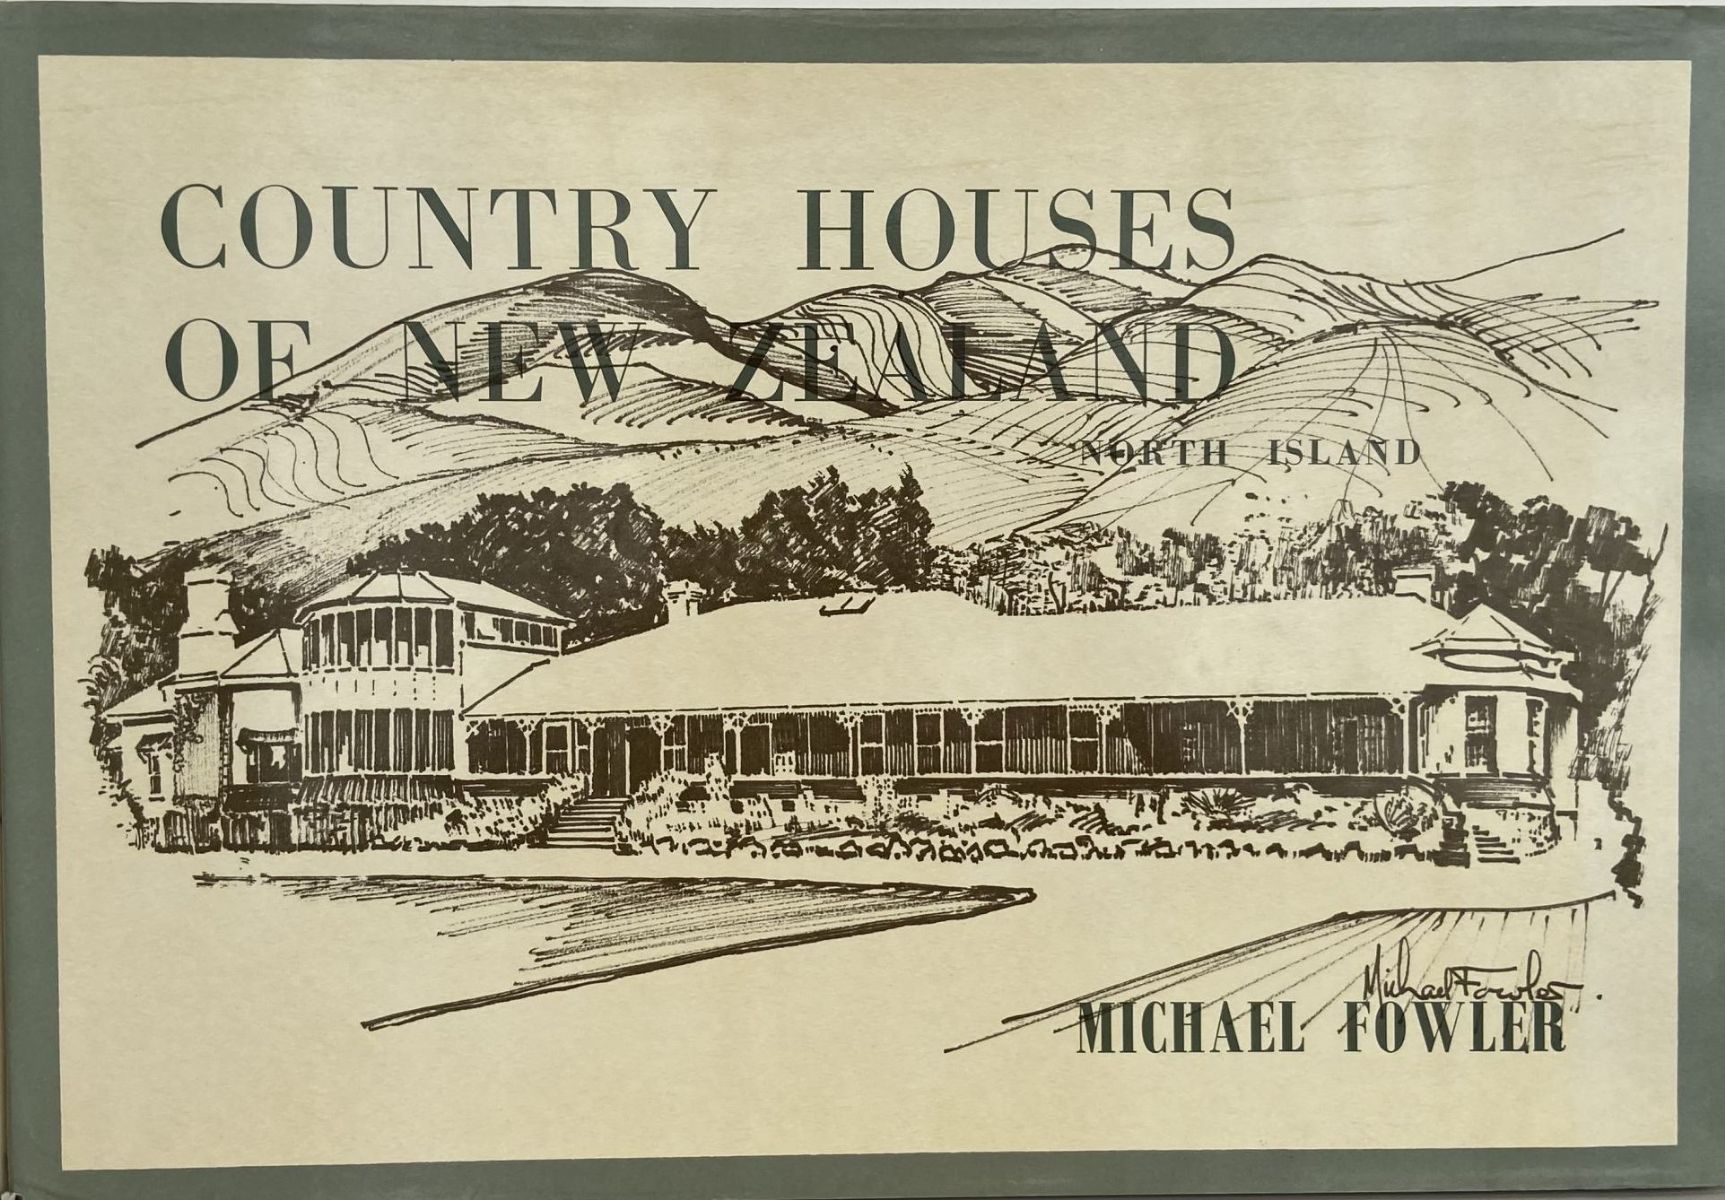 COUNTRY HOUSES OF NEW ZEALAND: North Island